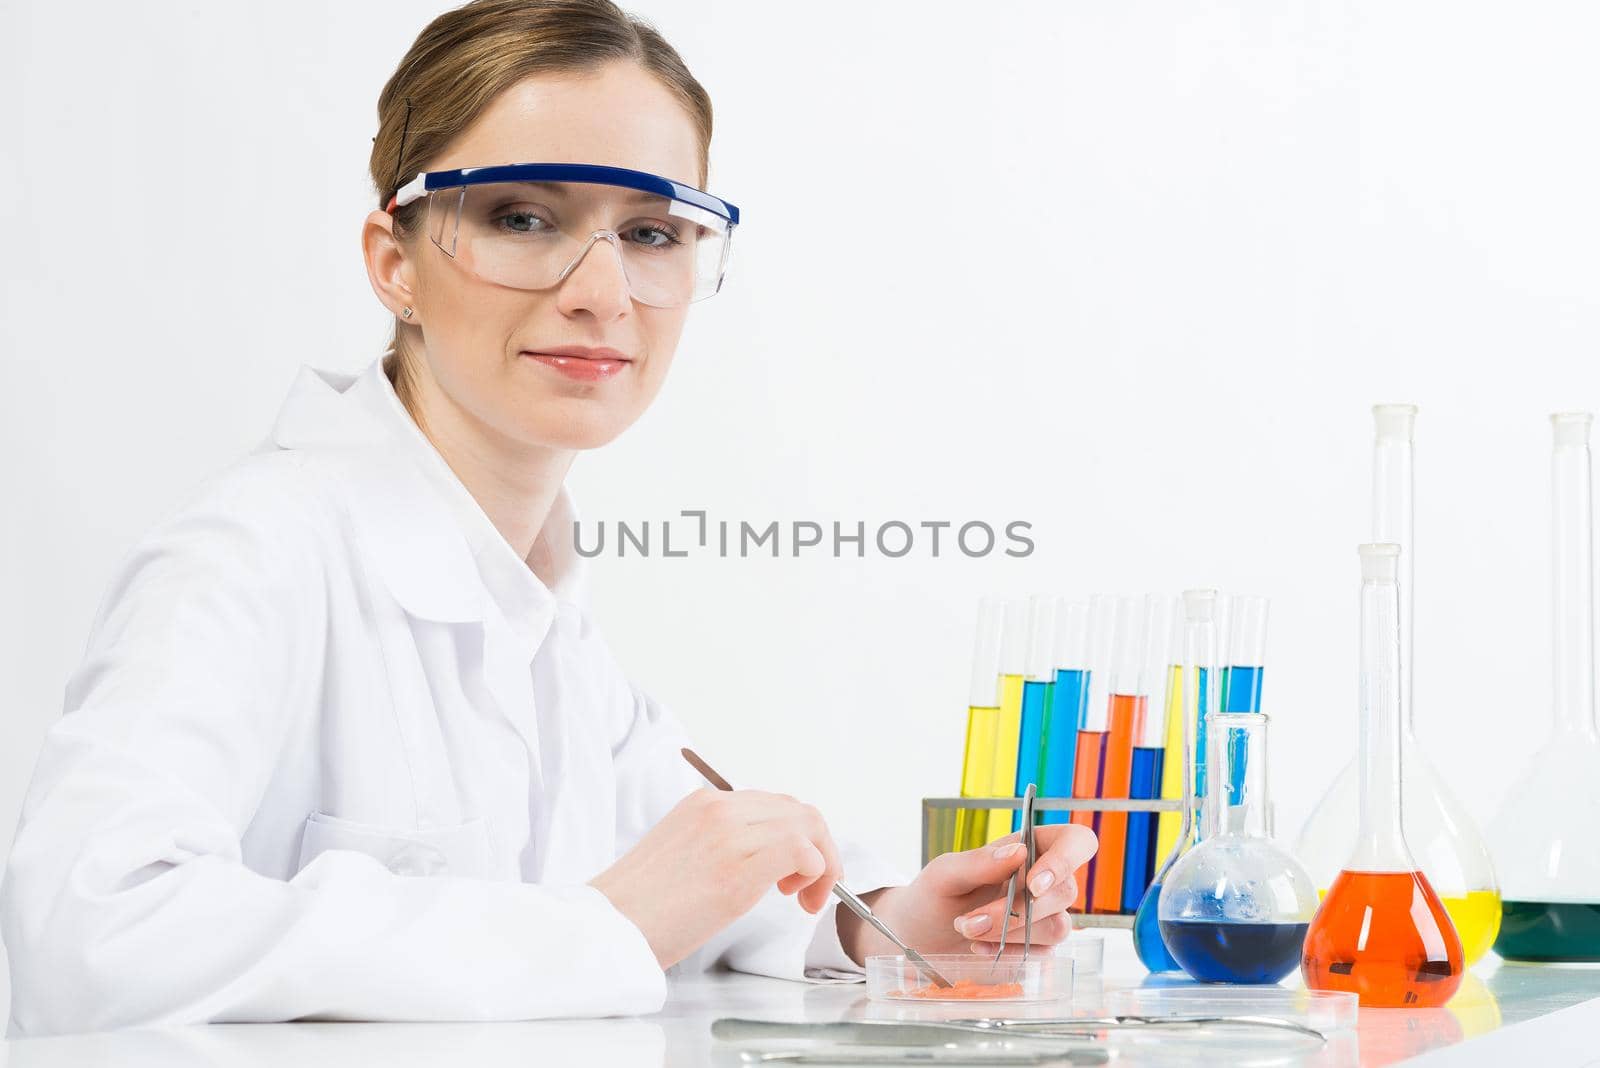 Microbiologist researching biomaterial with tweezers in petri dish. Molecular biology laboratory analysis and genetic experimentation. Beautiful woman scientist in protective goggles at workplace.